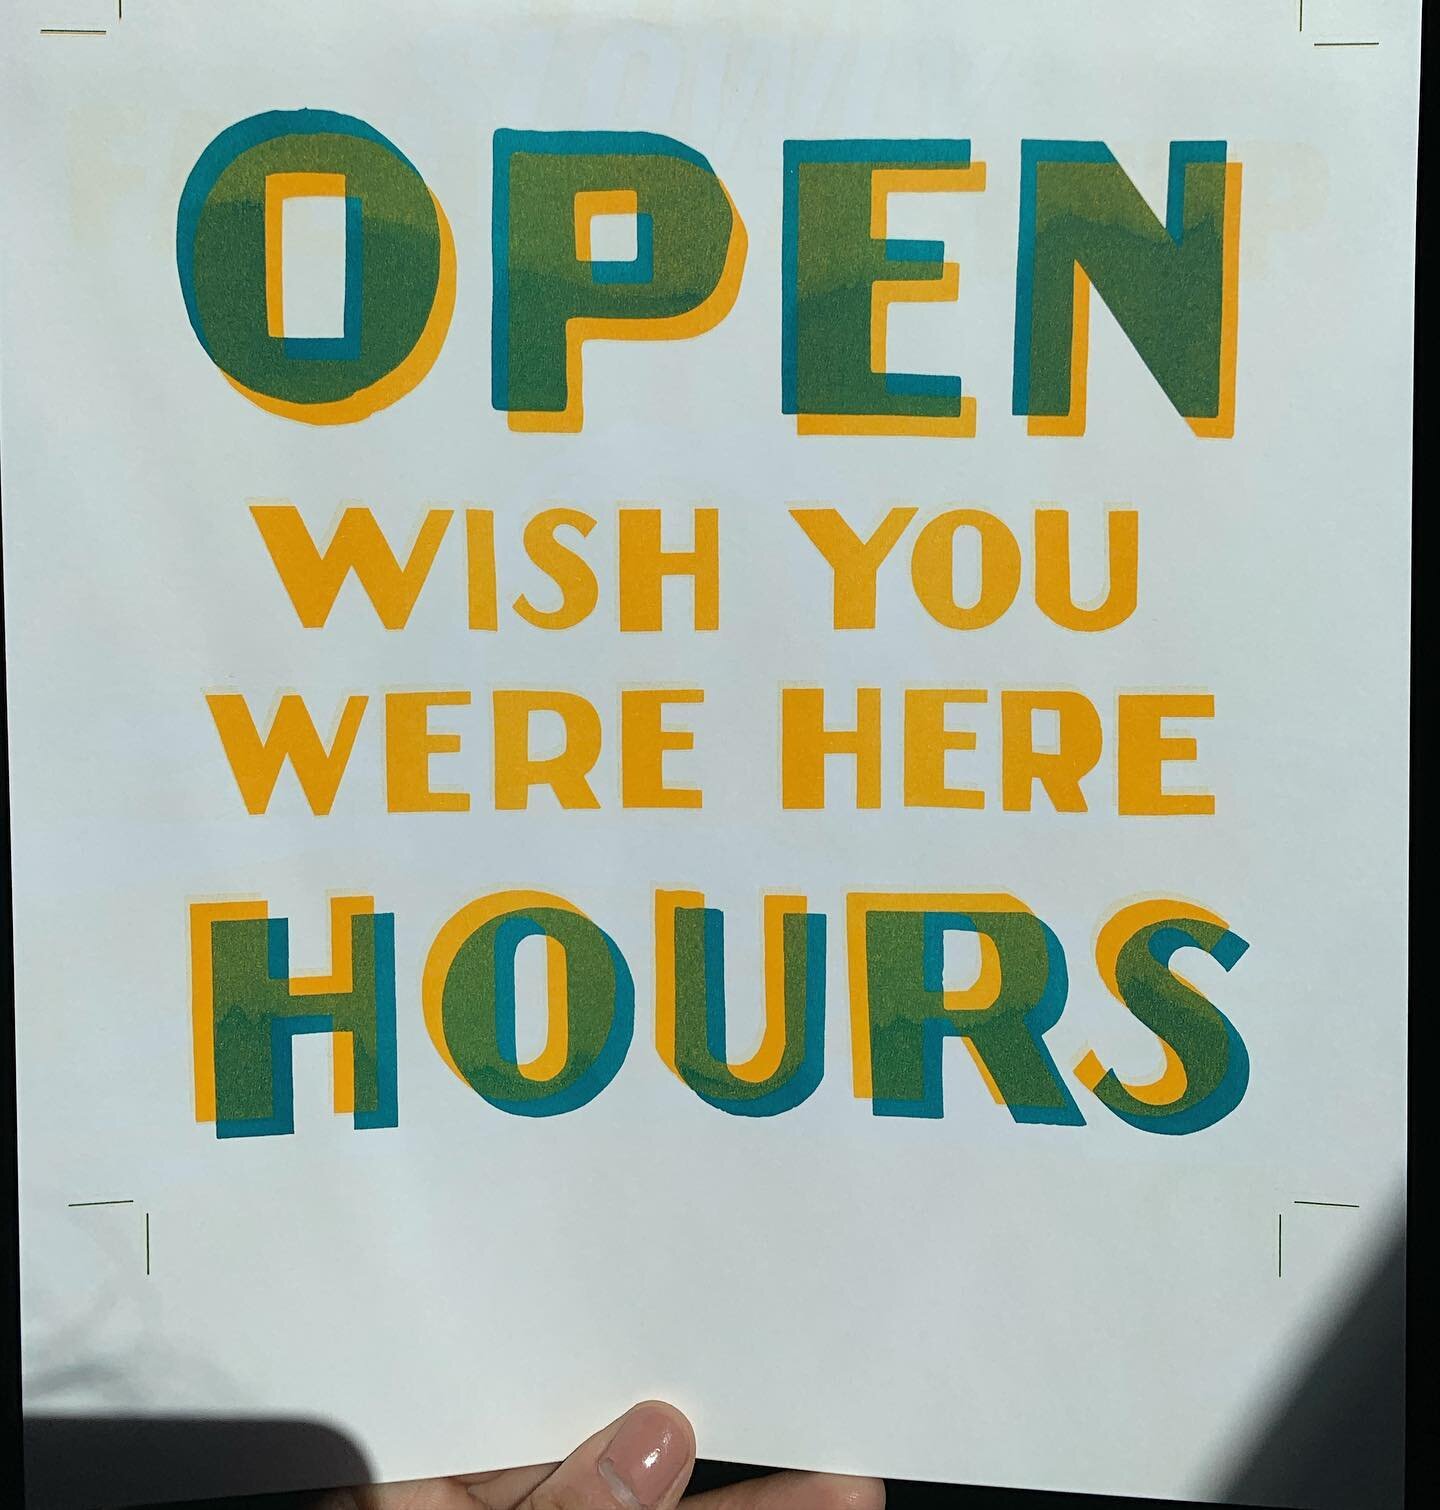 OPEN HOURS! Visit the penny press and posters in person! If the hours below don&rsquo;t work for you, let me know and we can setup an appointment. 
.
Tuesday through Thursday, 10am to 5pm
Late hours from 5 to 8pm on August 23rd, August 30th and Augus